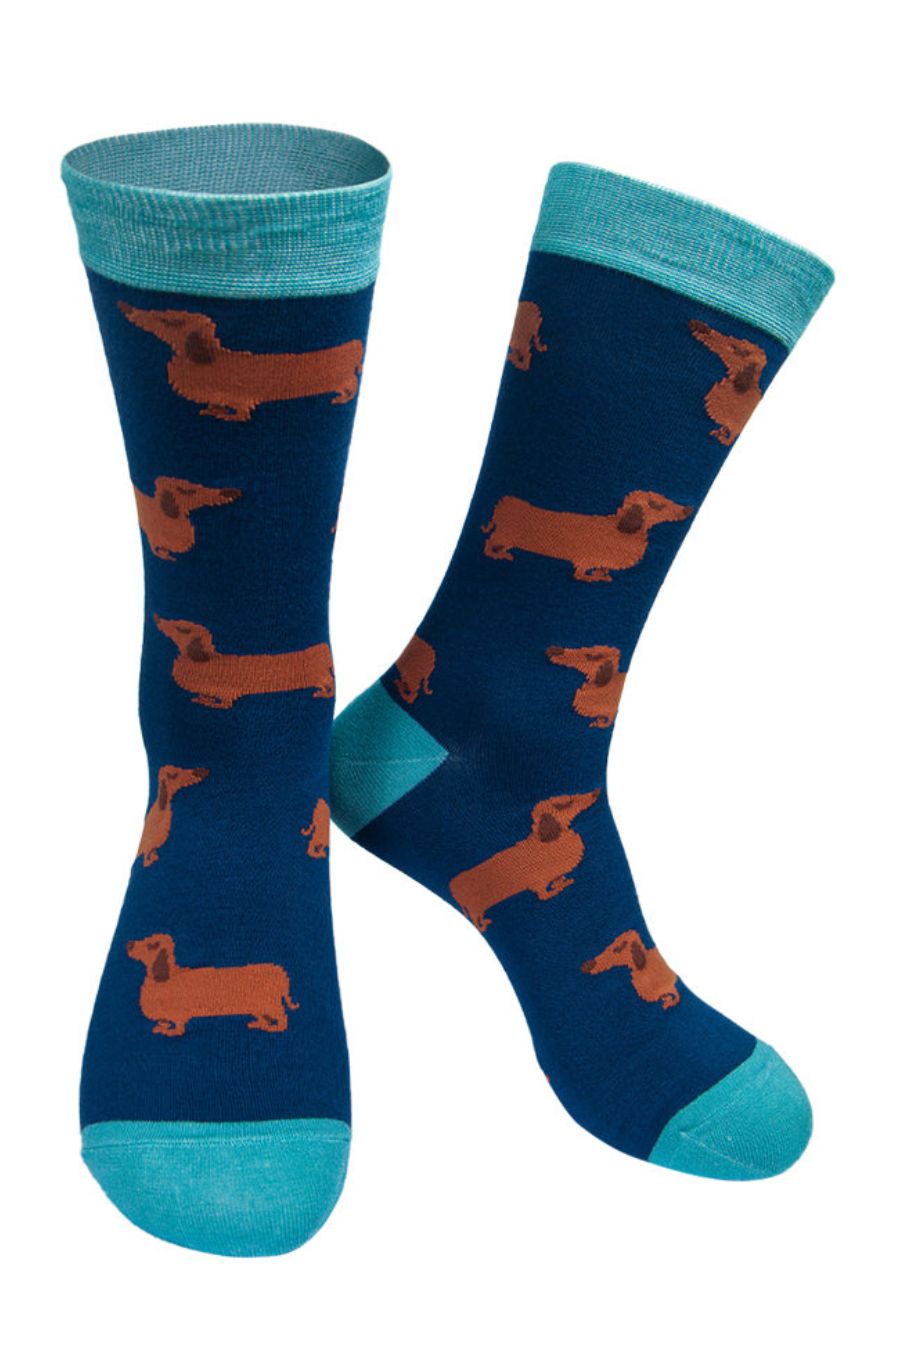 blue bamboo dress socks with an all over dachshund print